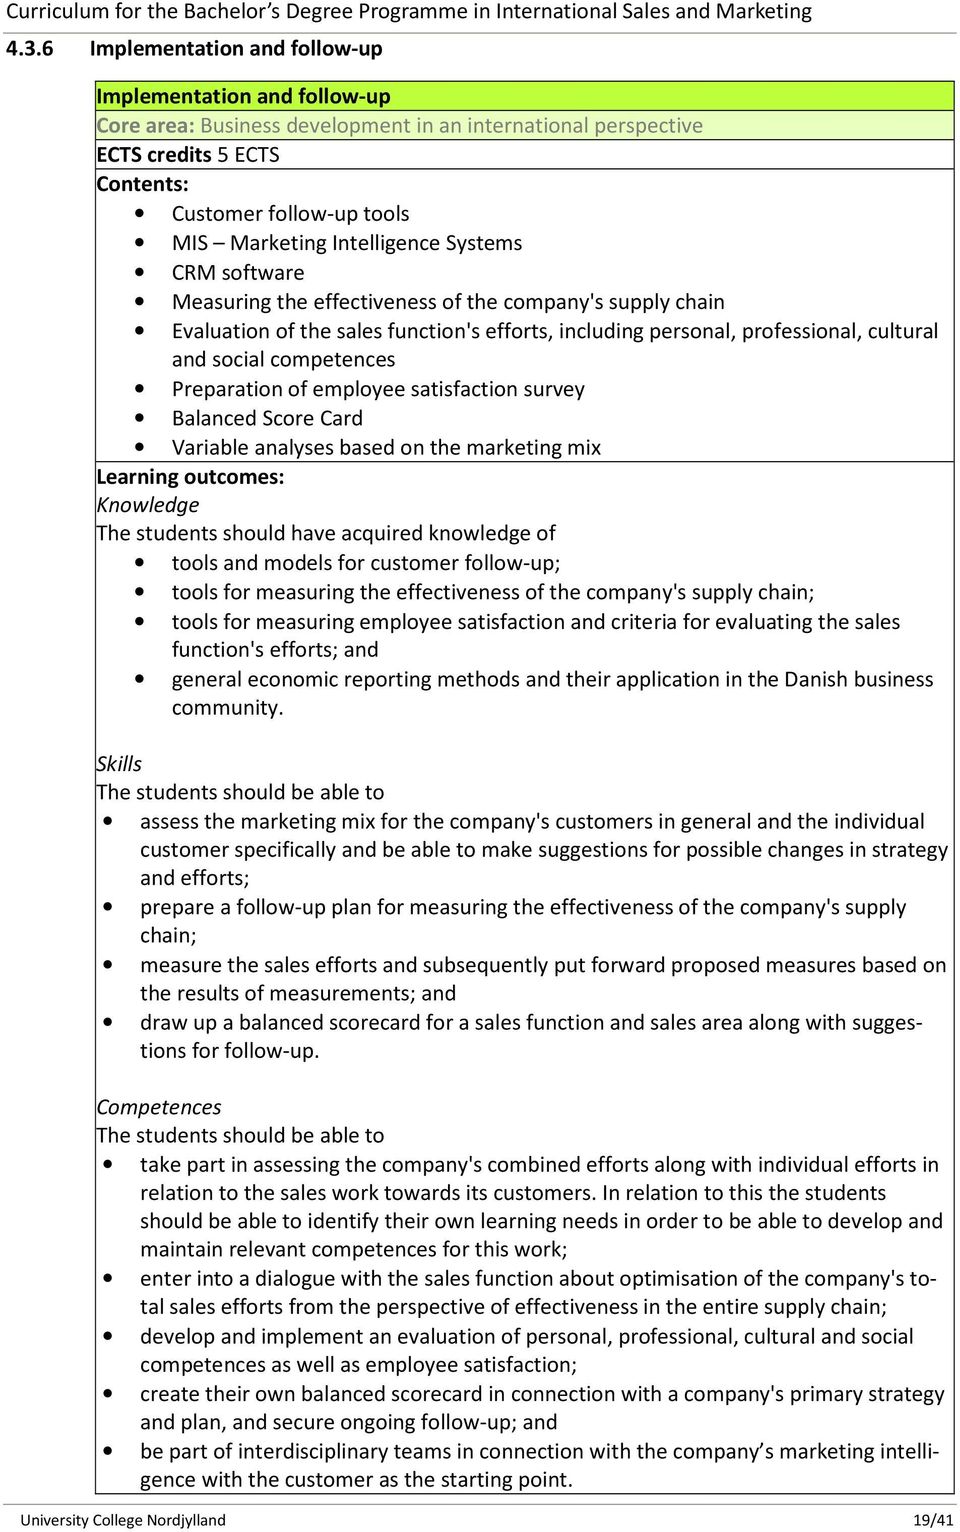 competences Preparation of employee satisfaction survey Balanced Score Card Variable analyses based on the marketing mix Learning outcomes: Knowledge The students should have acquired knowledge of